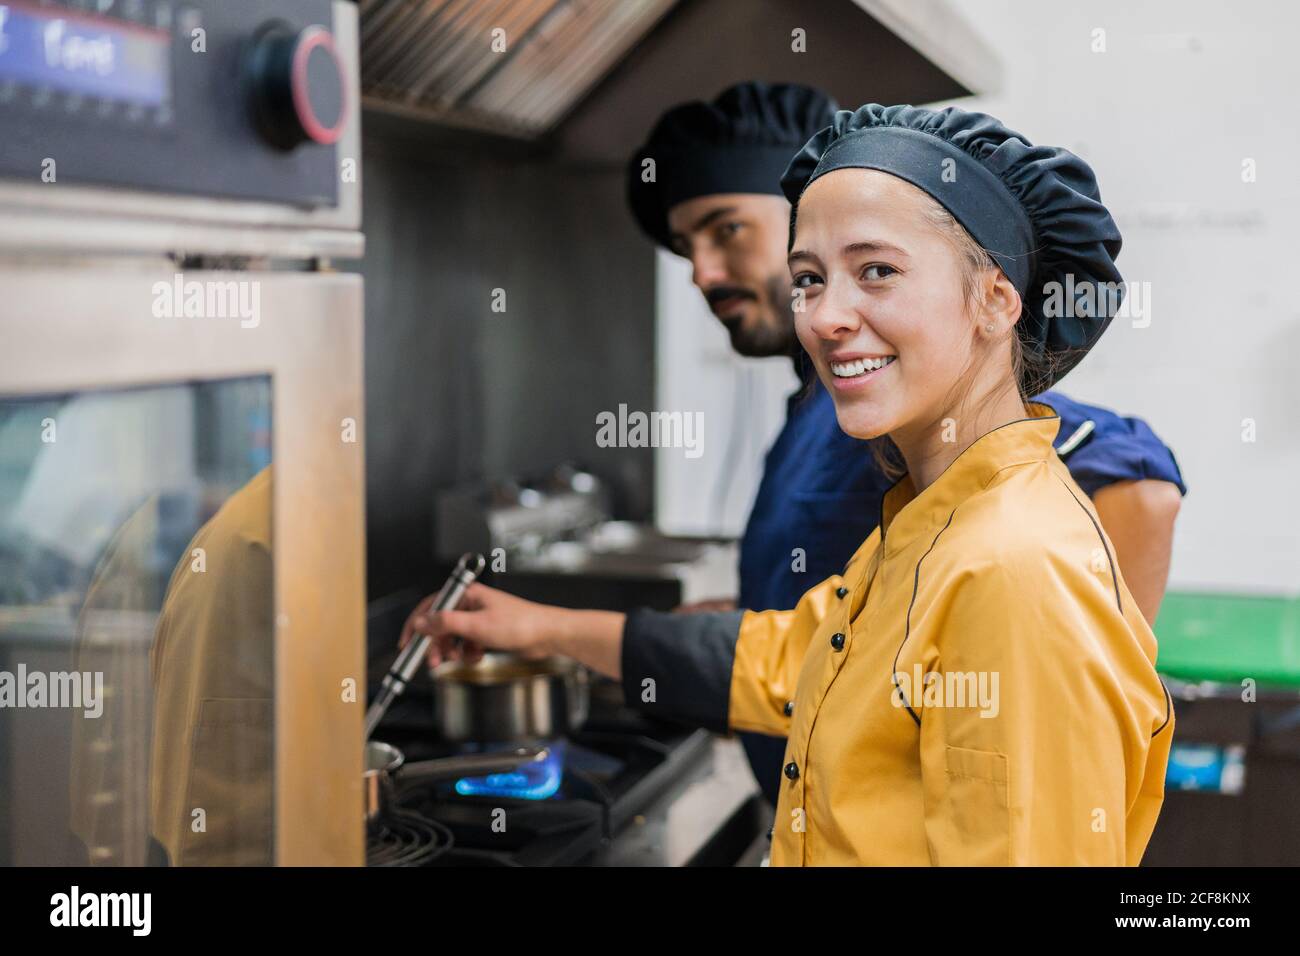 Professional chef and assistant working in kitchen Stock Photo